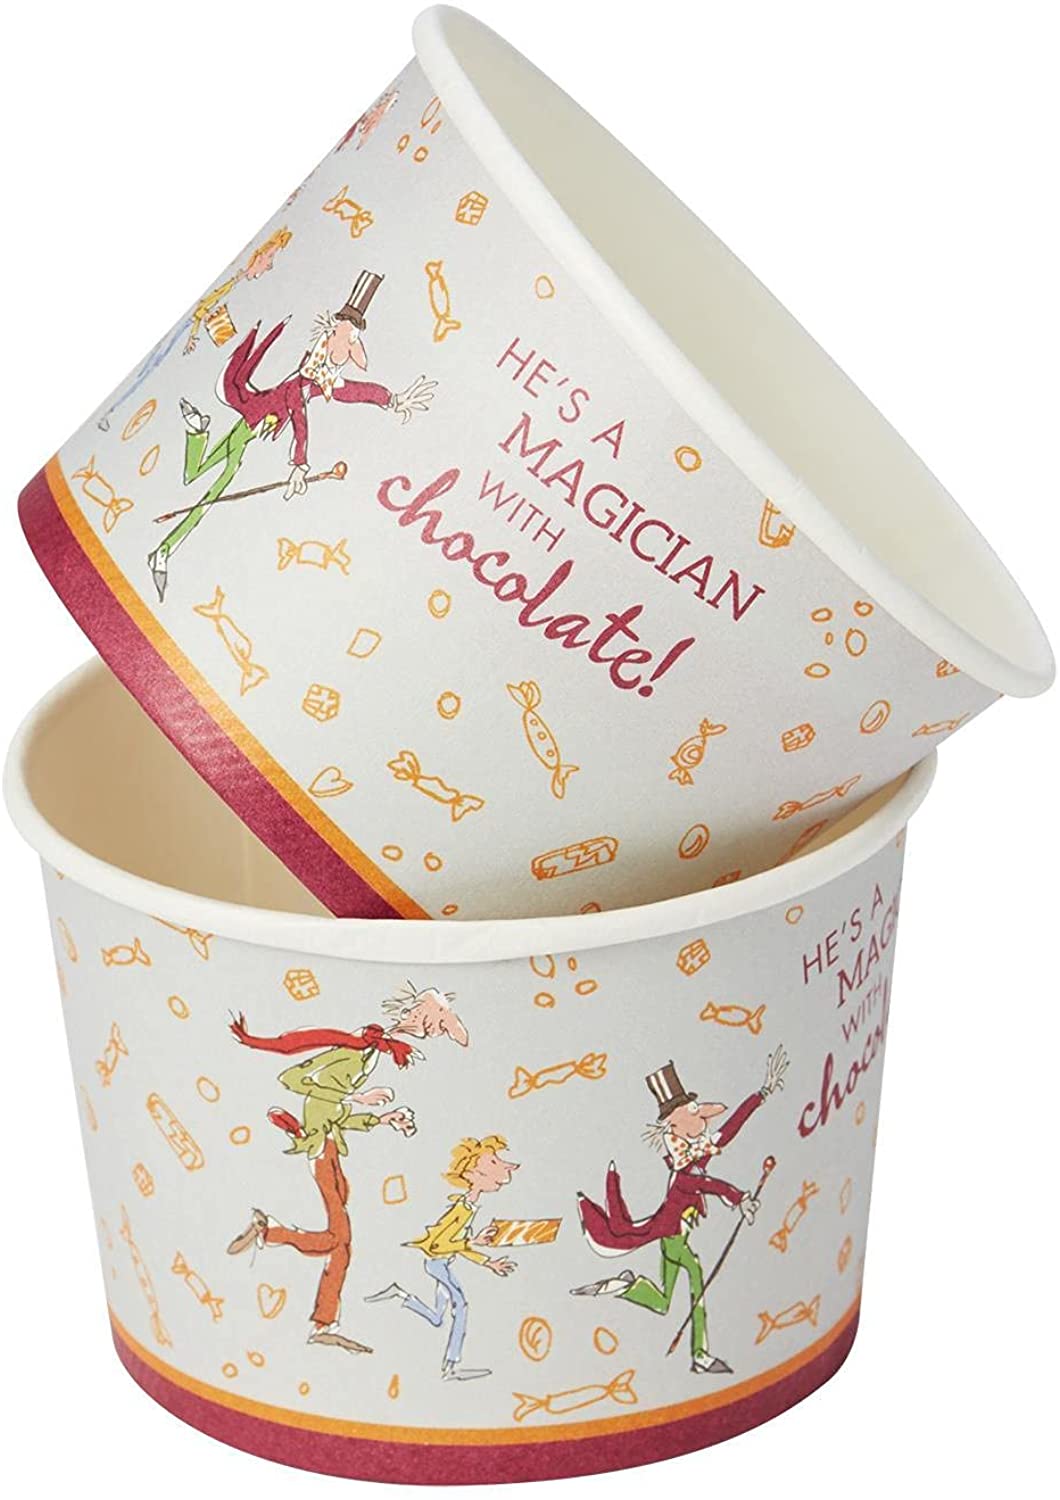 Smiffys Officially Licensed Roald Dahl Tableware Party Treat Tubs x8